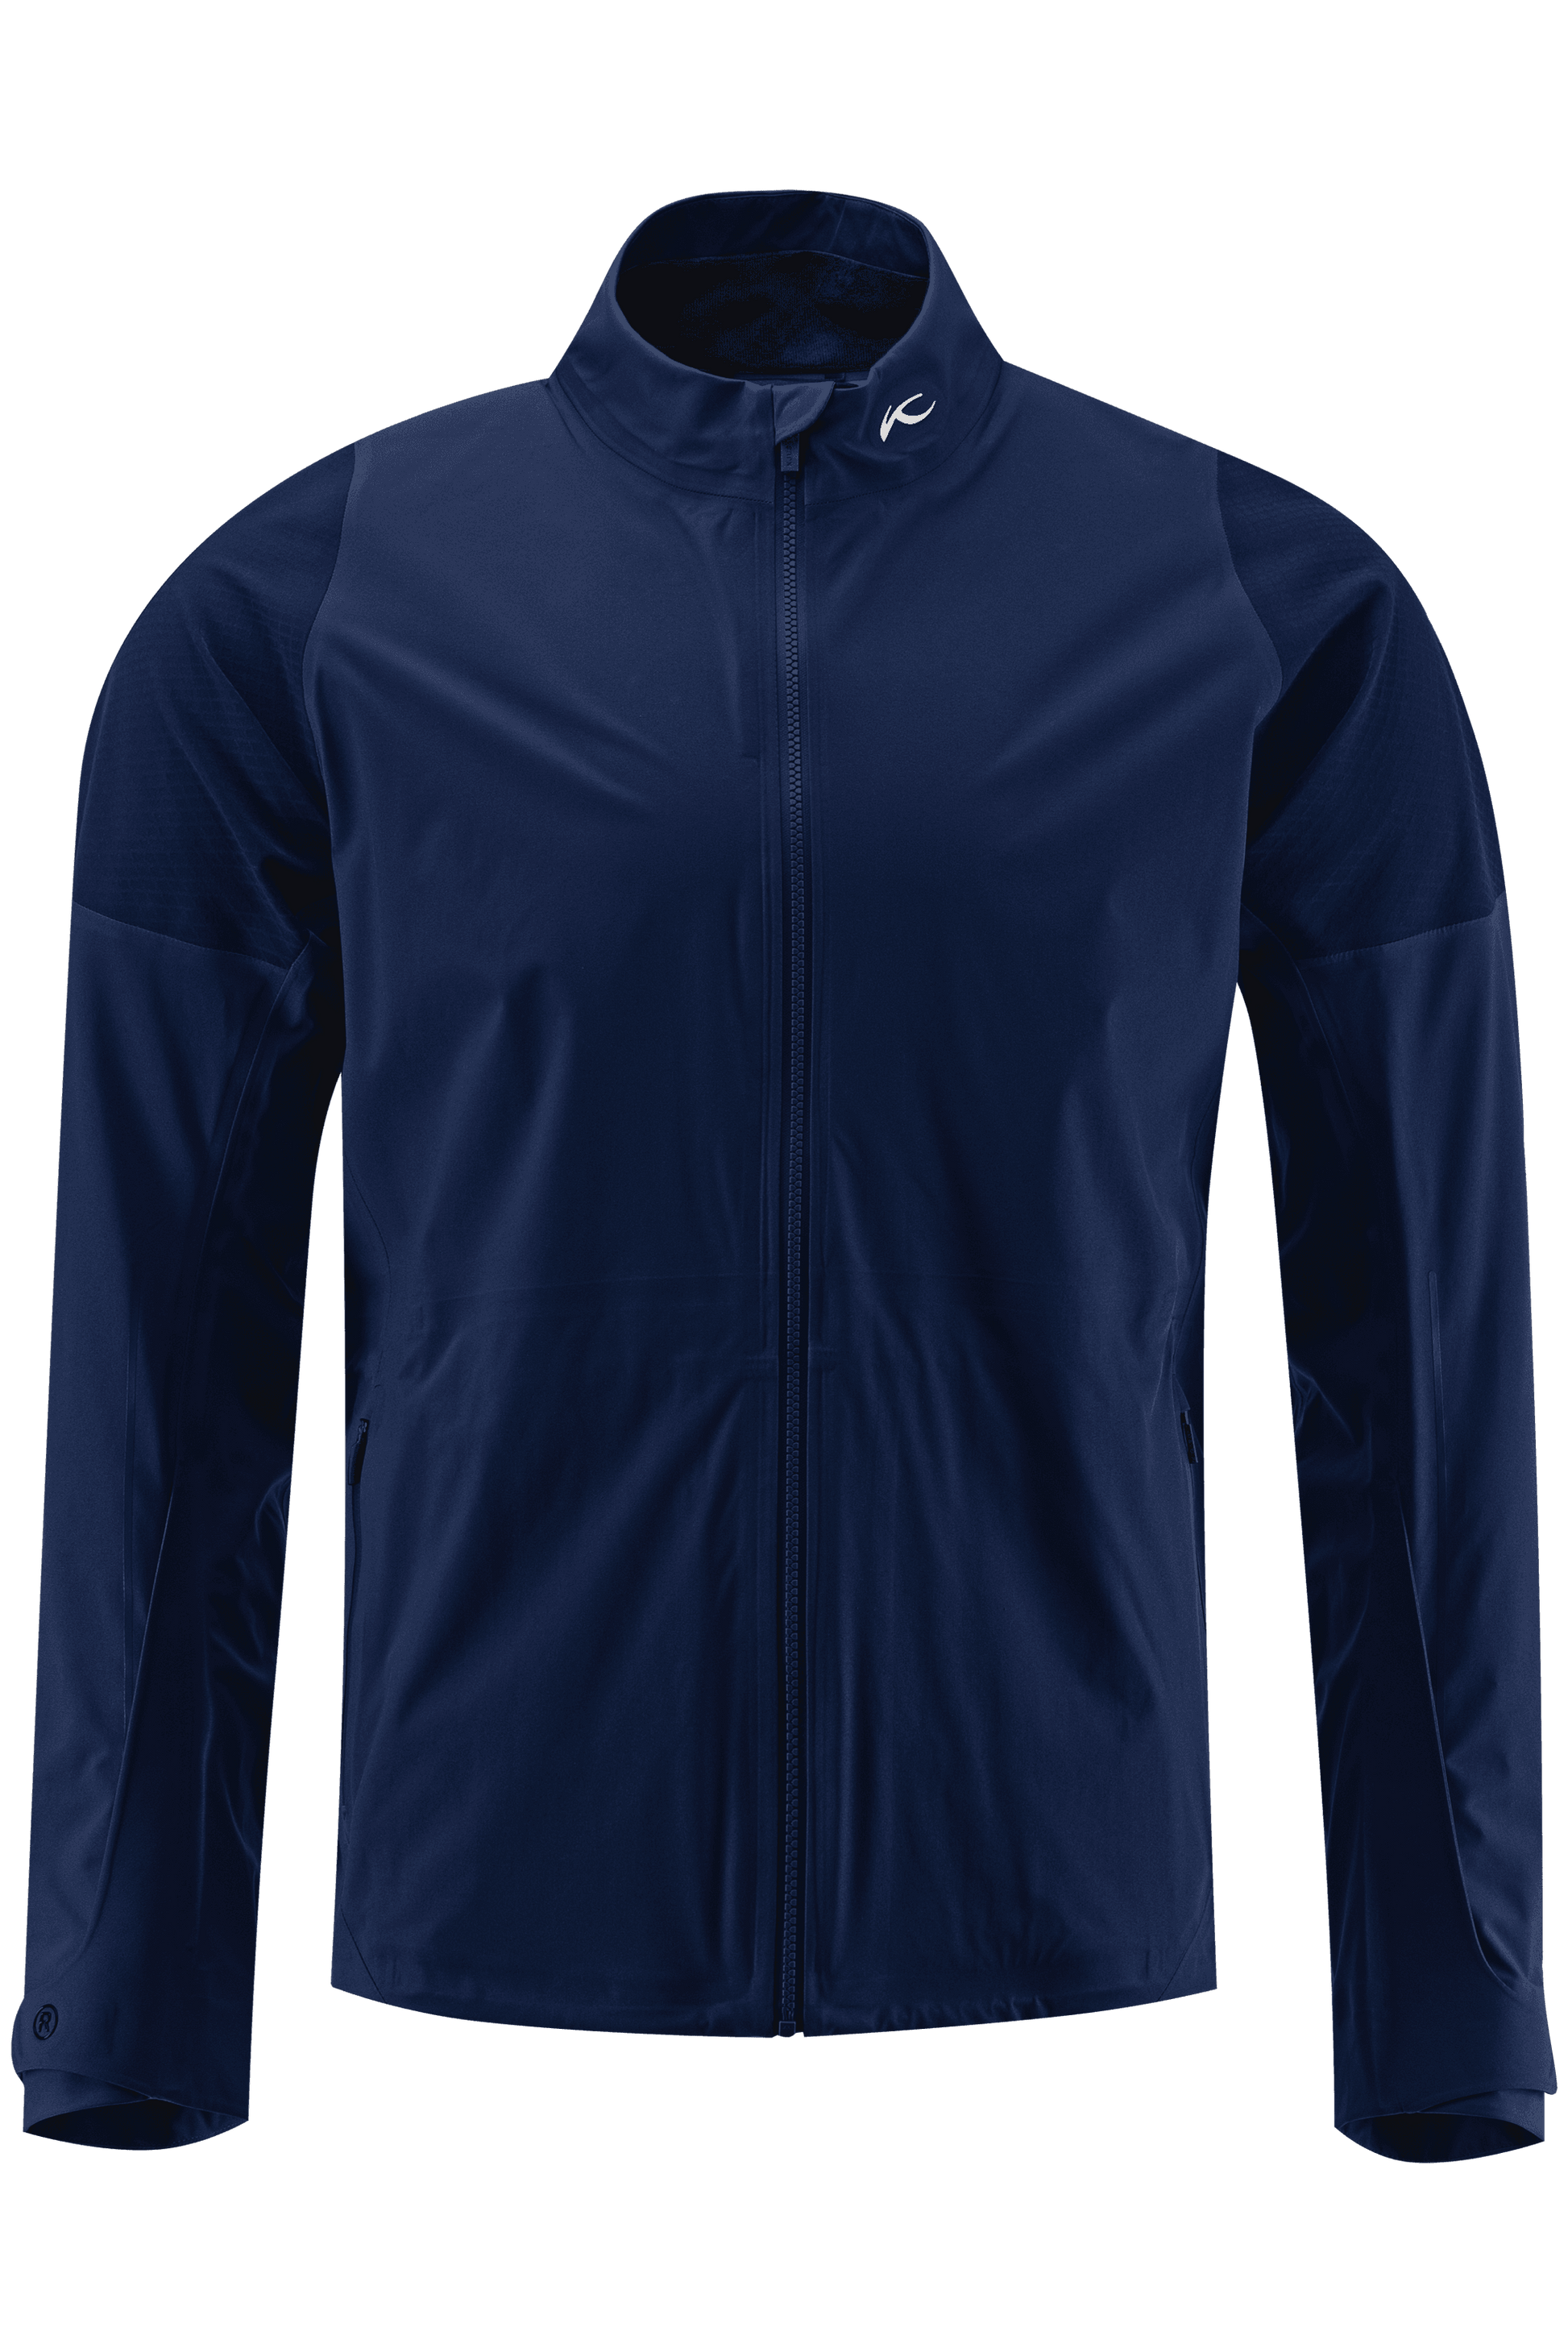 Men's Pro 3L 2.0 Jacket by Kjus - The Luxury Promotional Gifts Company Limited